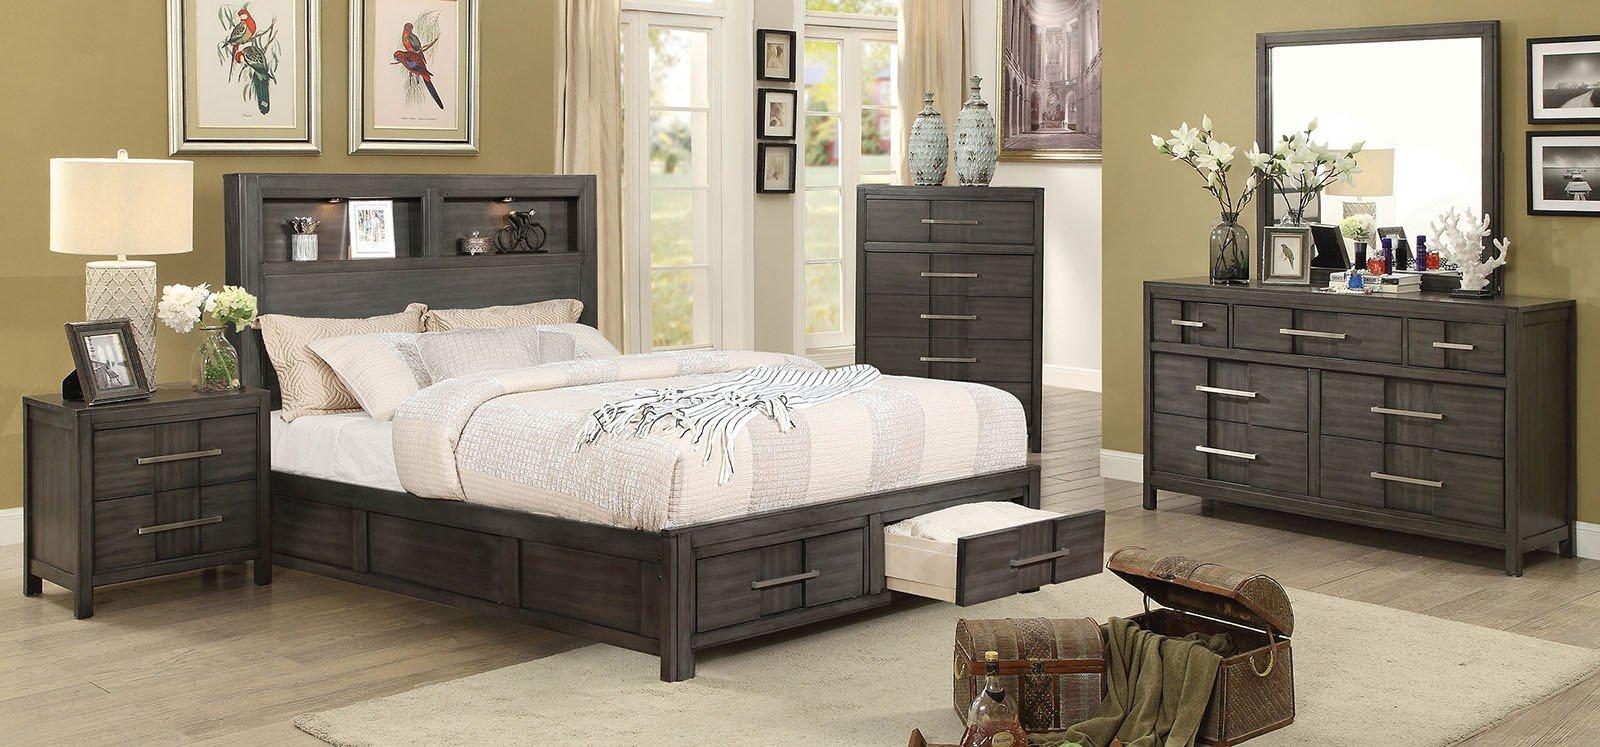 Transitional Storage Bedroom Set KARLA CM7500GY-Q CM7500GY-Q-5PC-2NS in Gray Matte